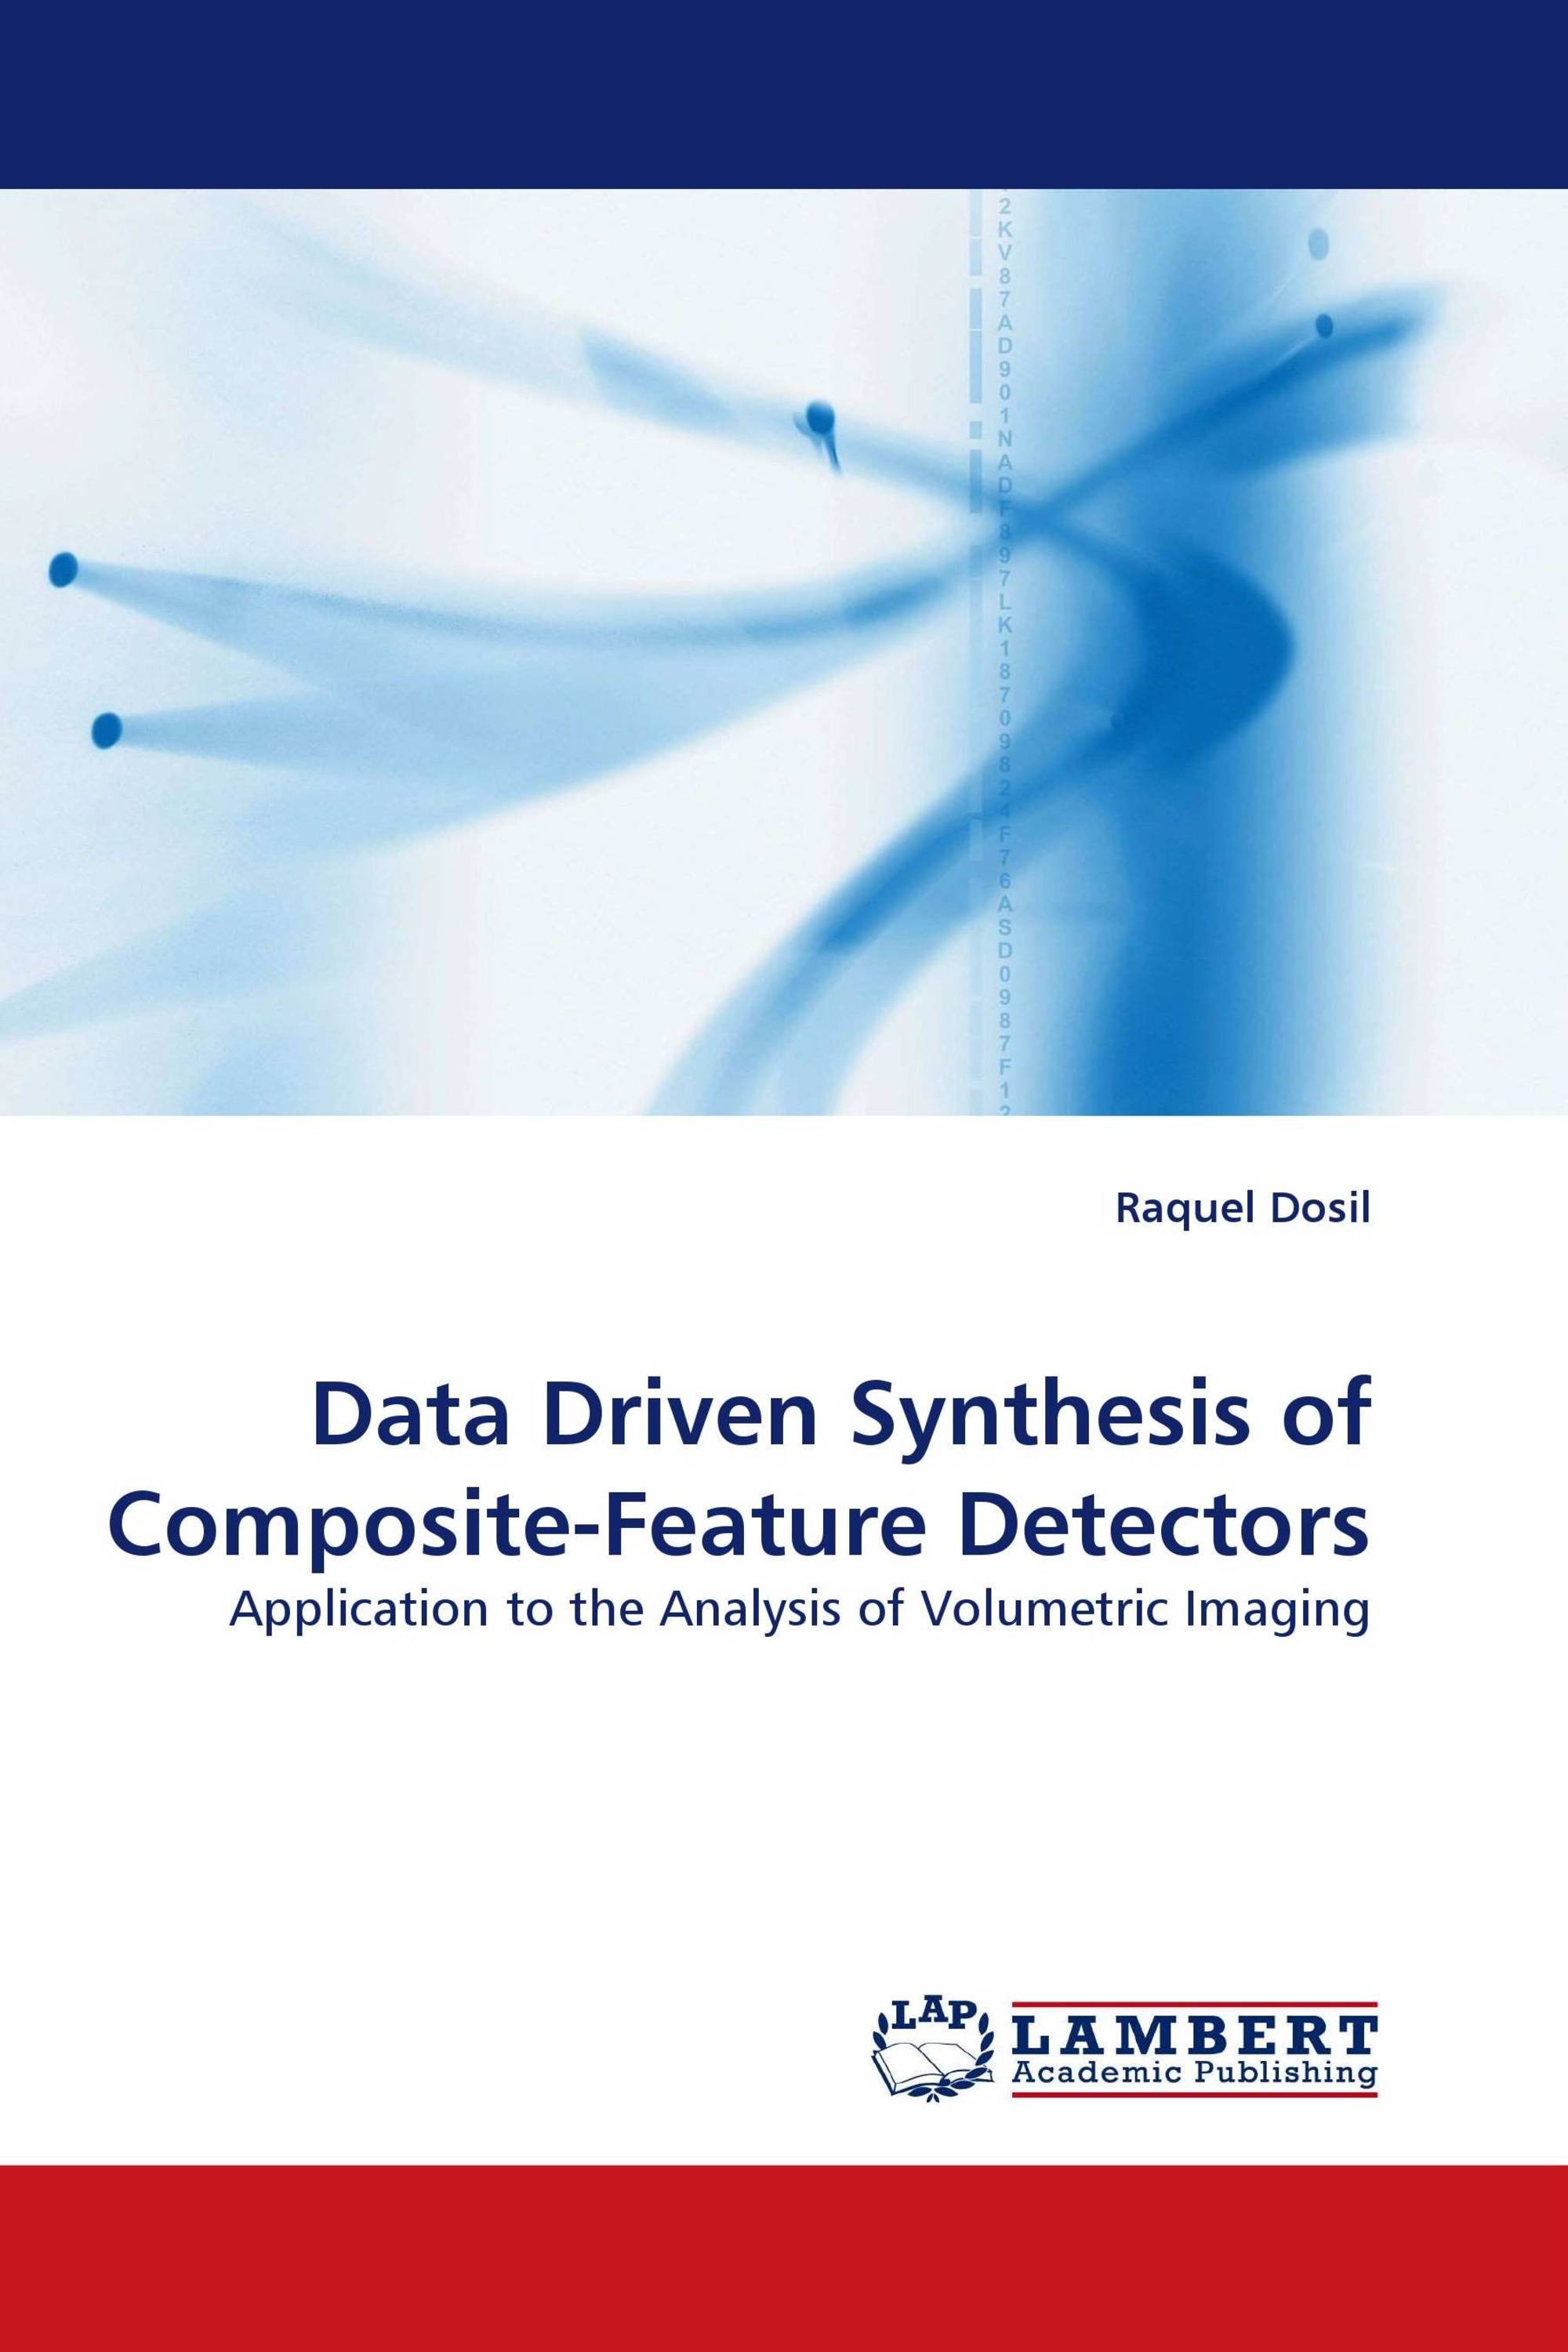 Data Driven Synthesis of Composite-Feature Detectors